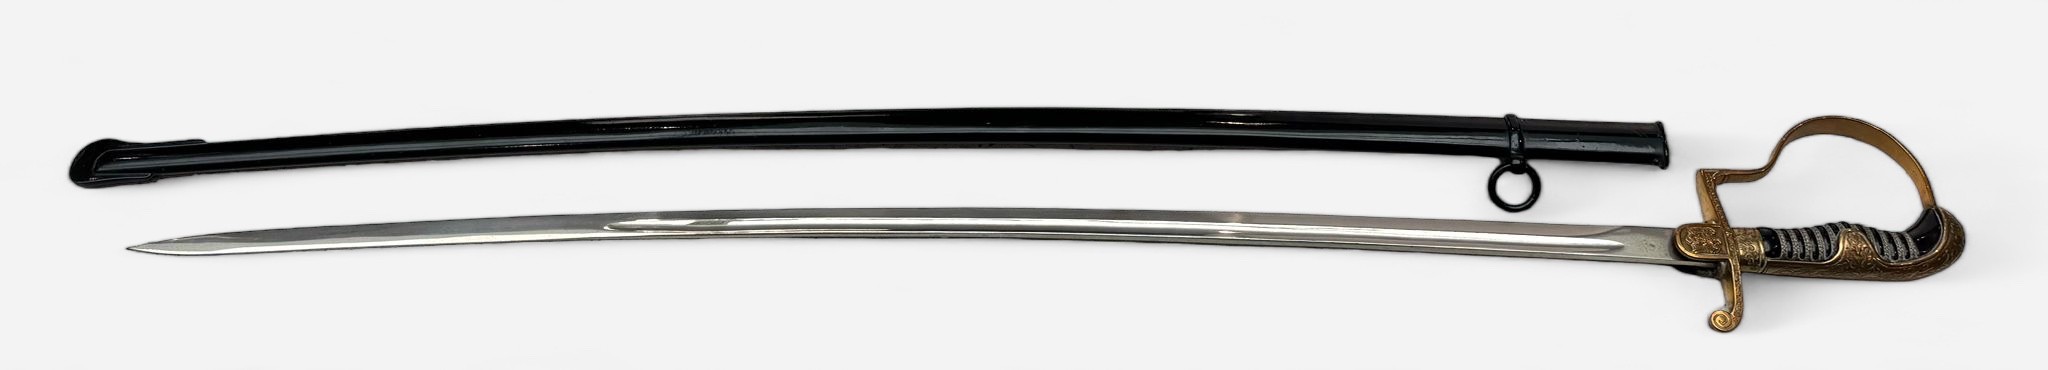 A WWII German Third Reich Officer's Dress Sword, with 32'' slightly curved fullered blade, ricasso